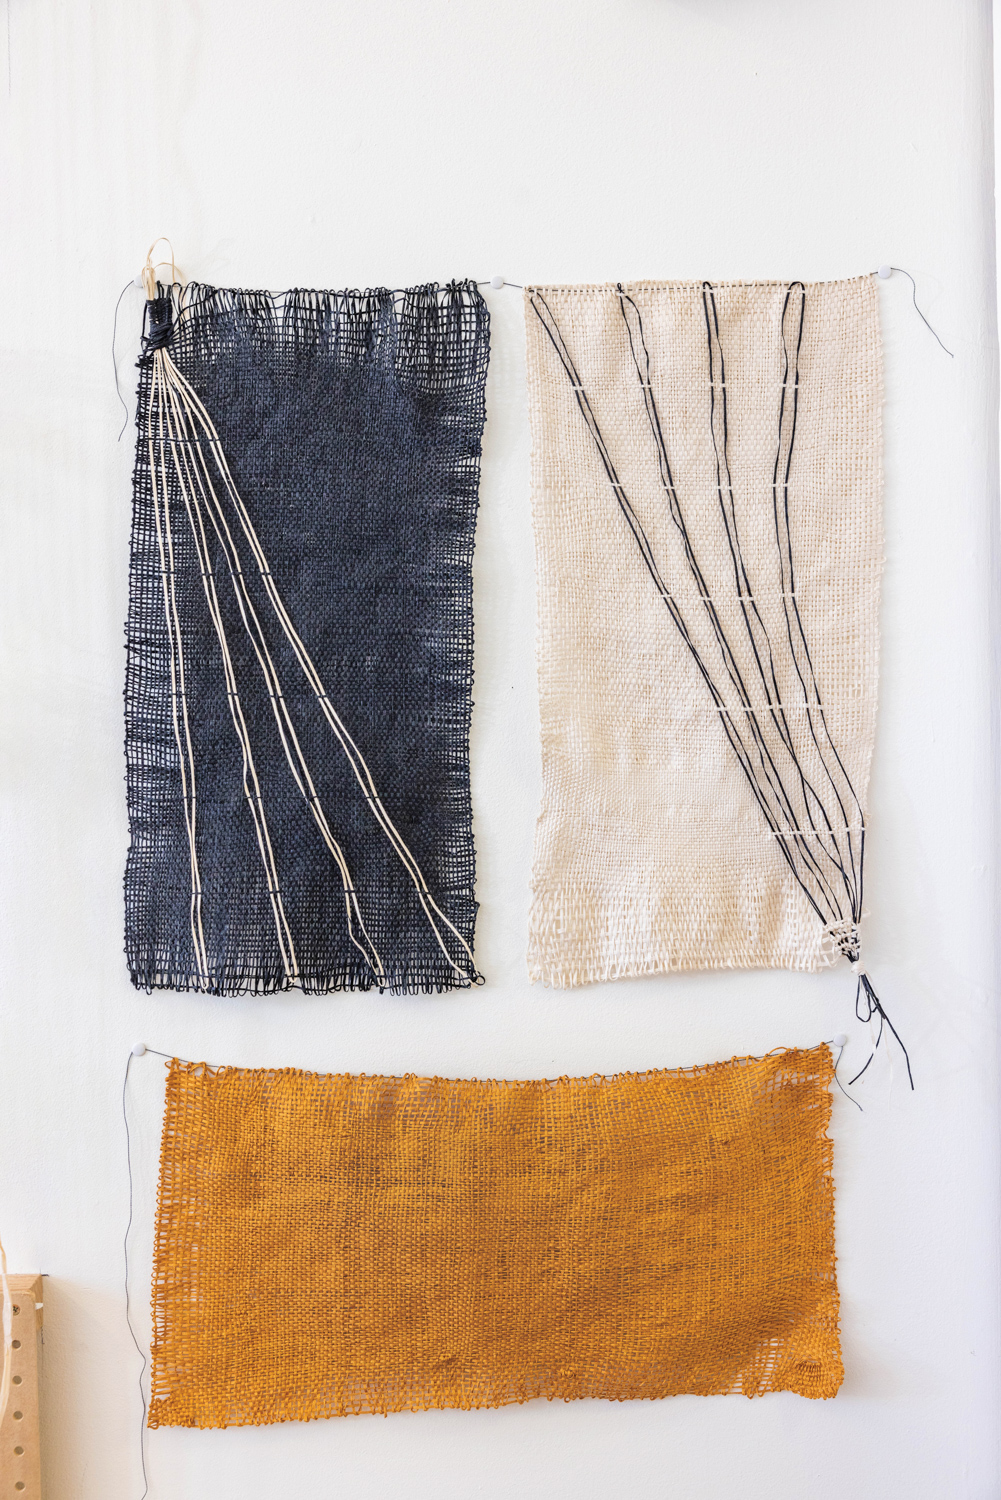 three freeform woven textiles hanging on a white wall